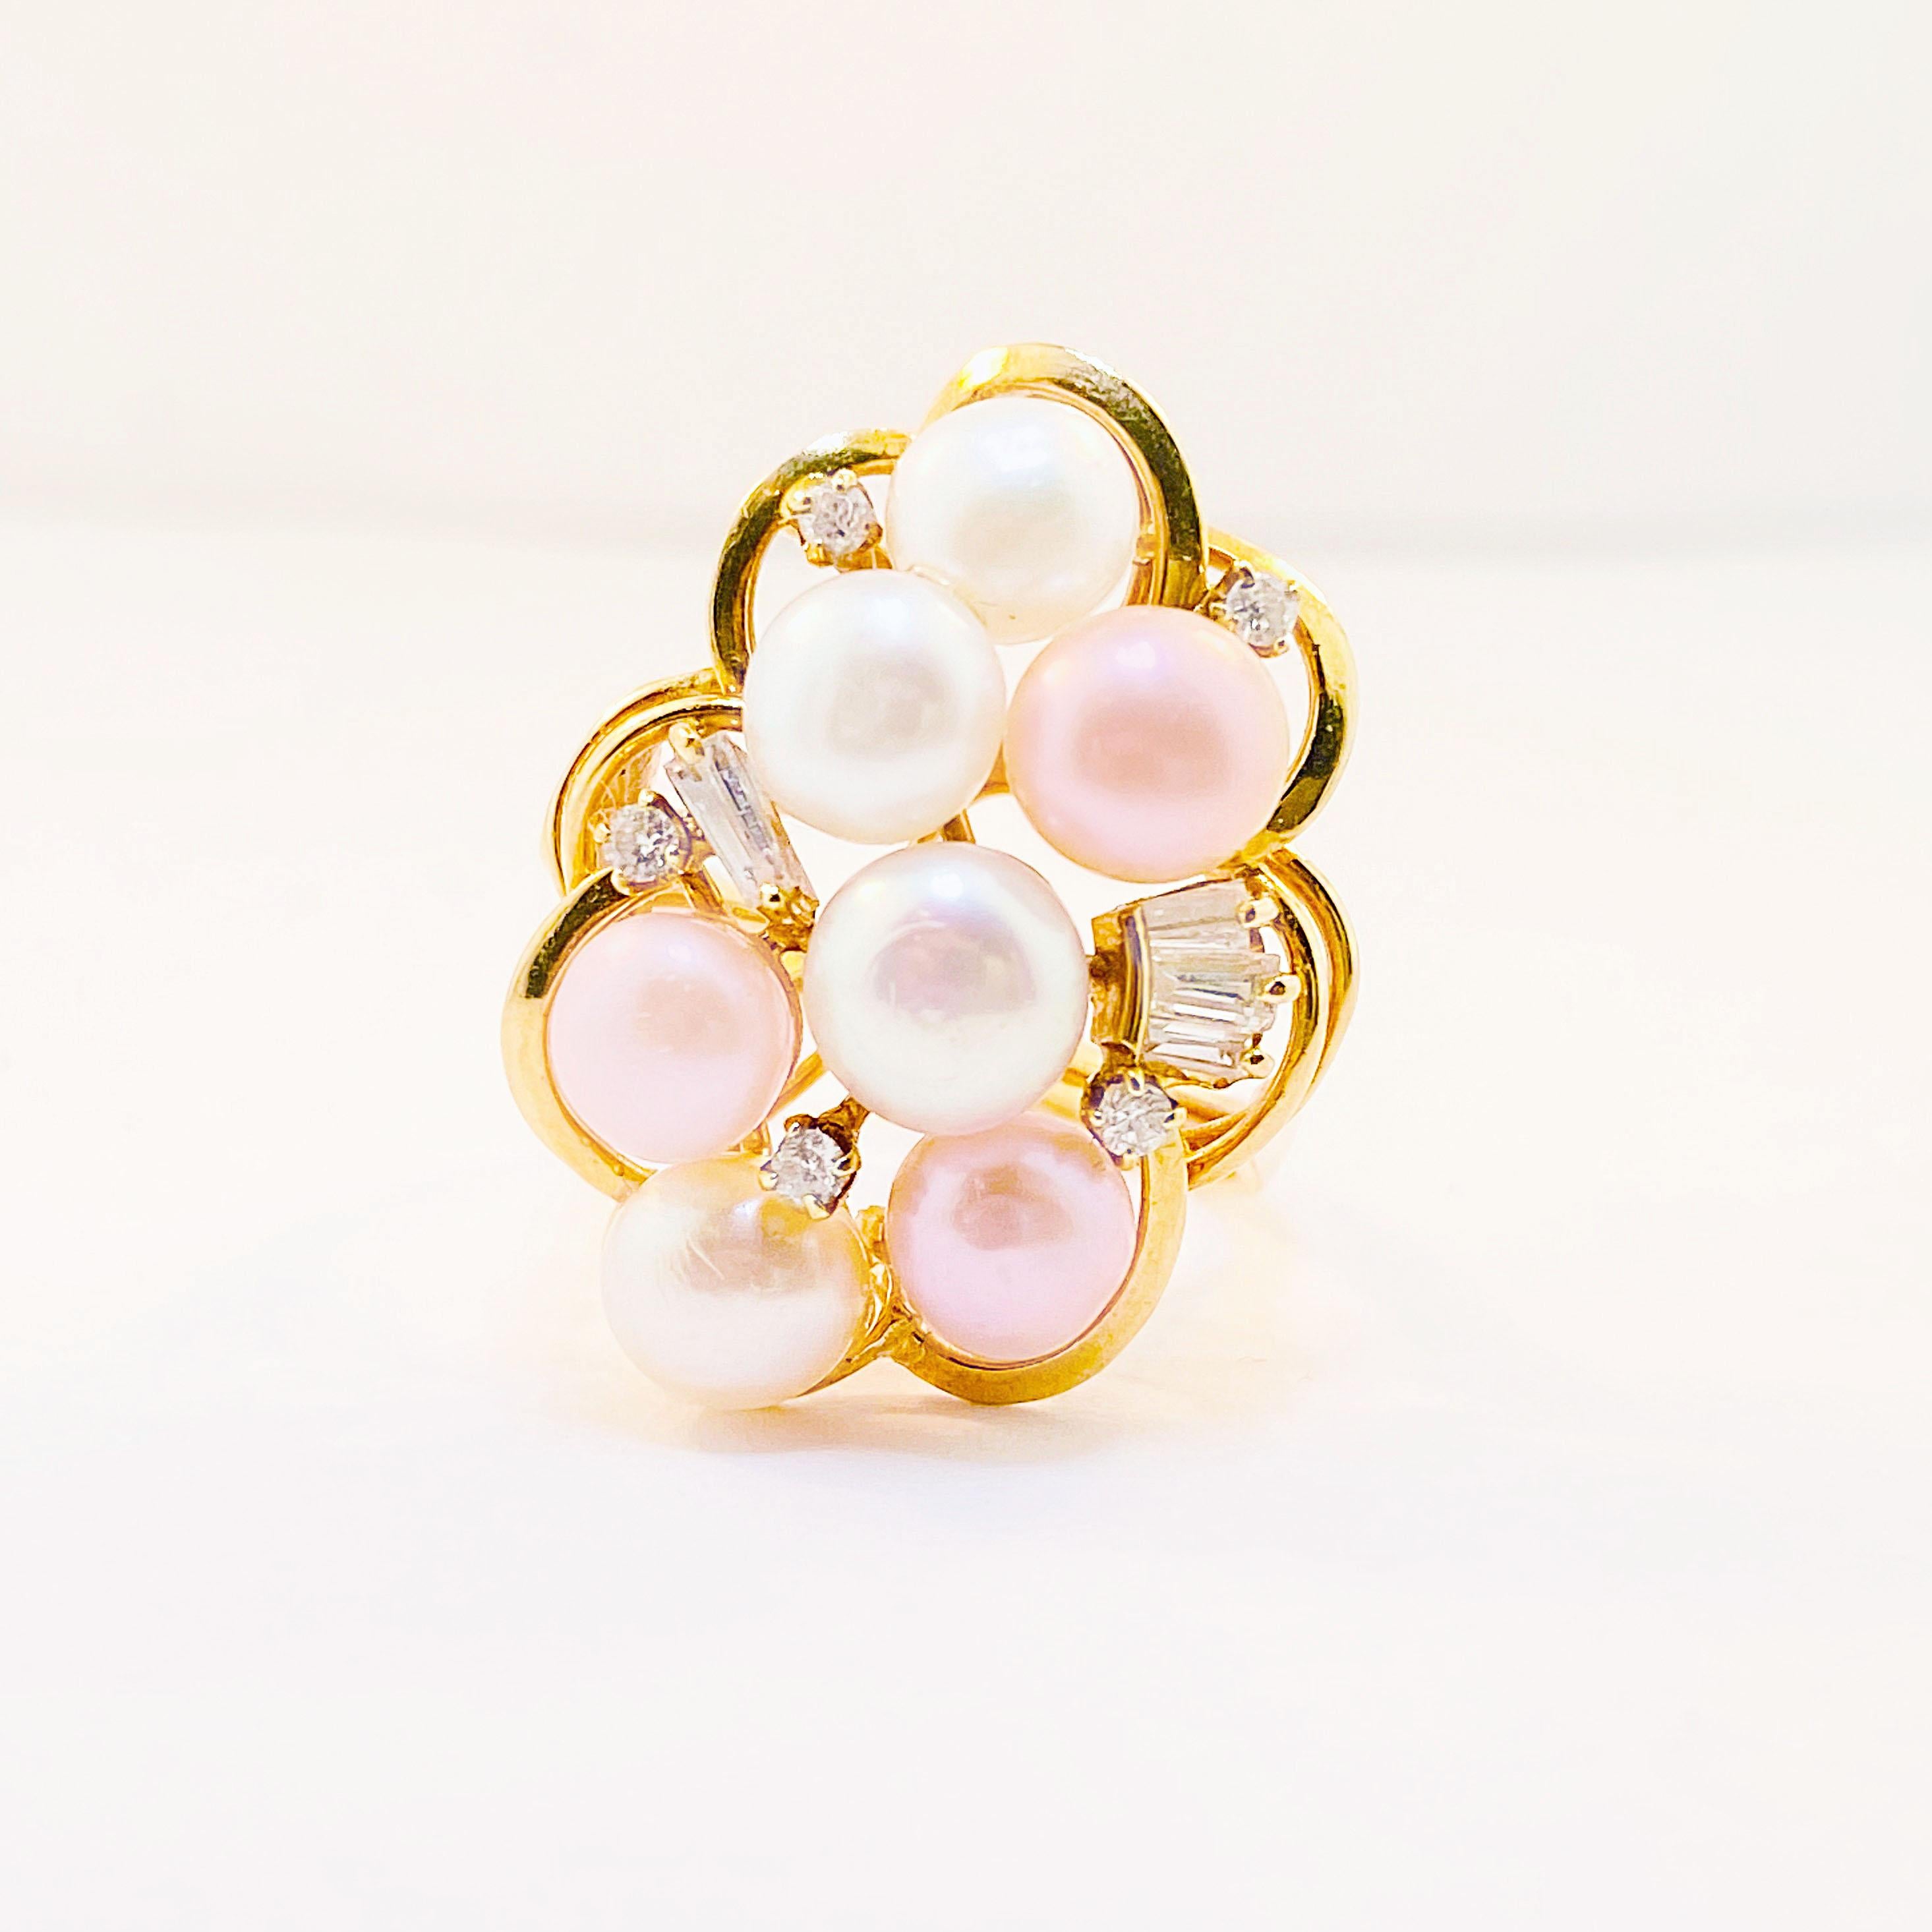 Genuine Cultured Pearl and Natural Diamond Cocktail Ring! This special piece is a fine jewelry item with natural, round brilliant diamonds and natural, baguette diamonds paired perfectly with genuine, cultured pearls that have gorgeous rose and